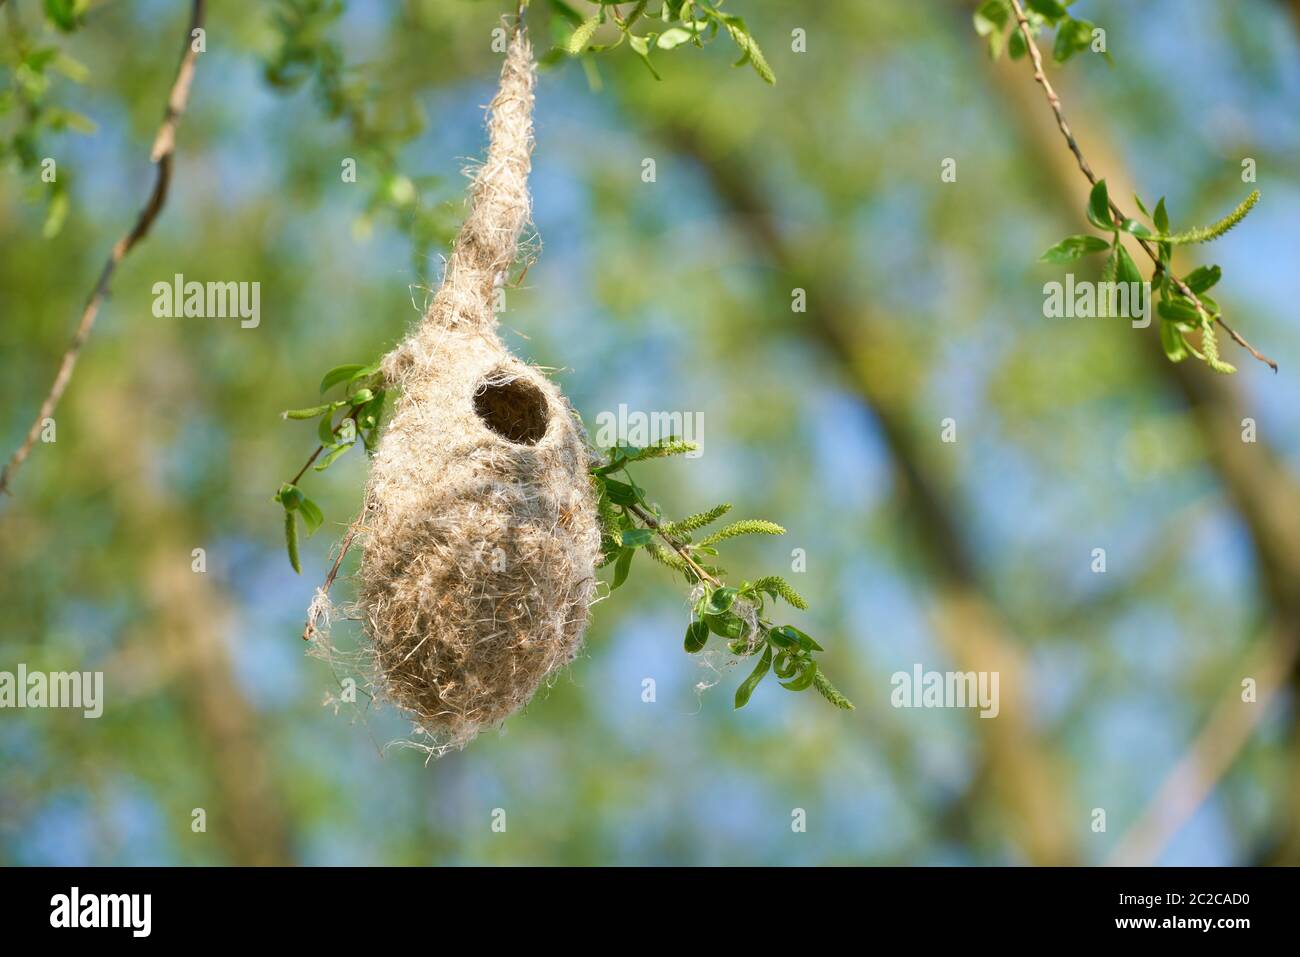 Nest of a Penduline Tit (Remiz pendulinus) in spring in a nature reserve near Magdeburg in Germany Stock Photo